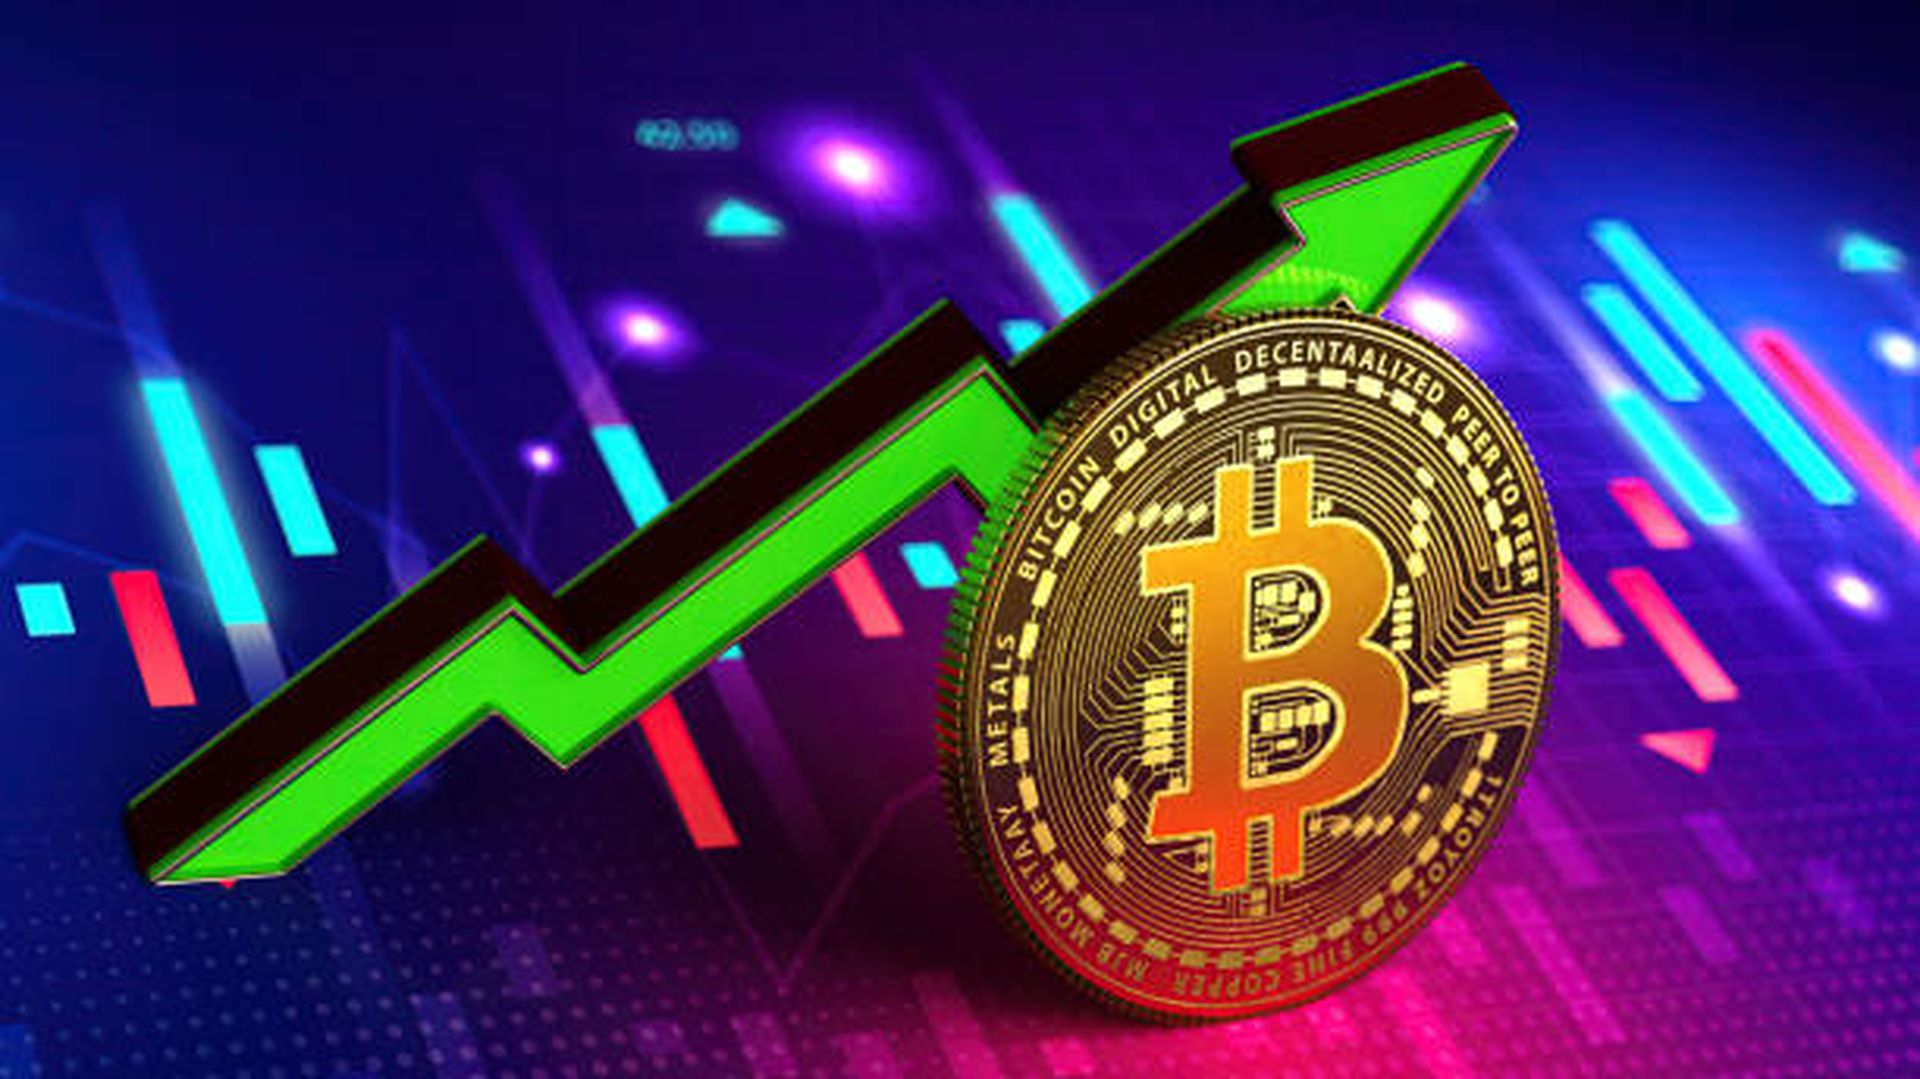 Bitcoin’s ‘Important Chart’ Reaches New $94T All-Time High